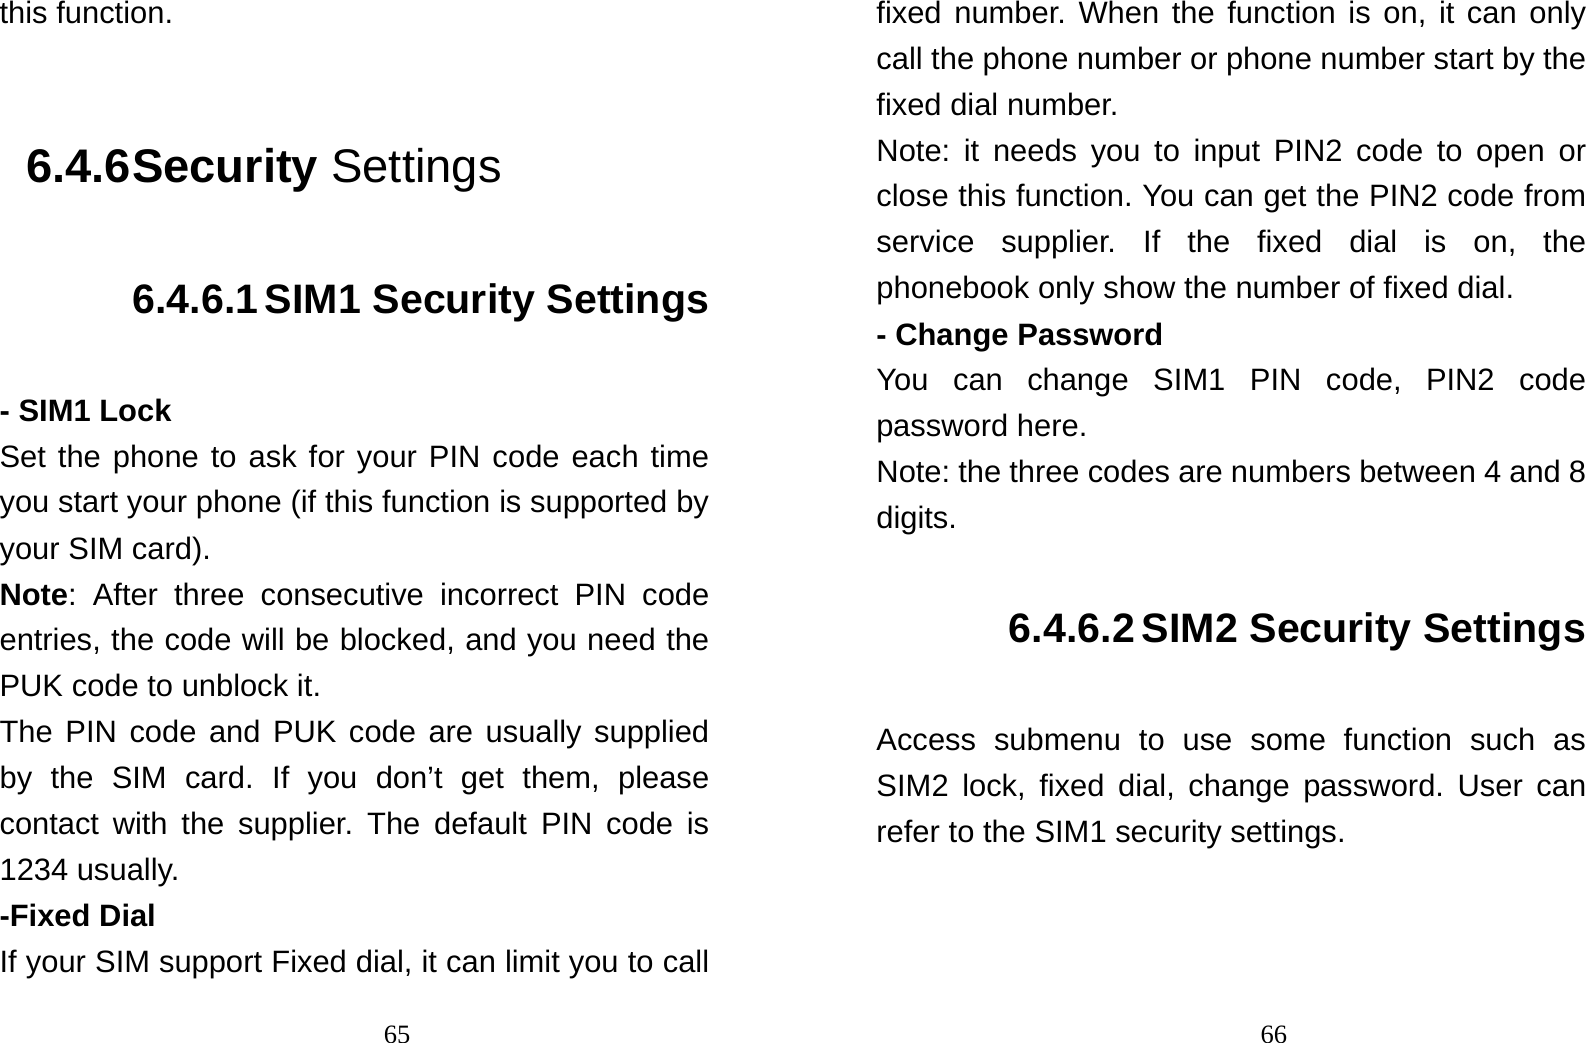                                65this function.  6.4.6 Security Settings 6.4.6.1 SIM1 Security Settings - SIM1 Lock Set the phone to ask for your PIN code each time you start your phone (if this function is supported by your SIM card). Note: After three consecutive incorrect PIN code entries, the code will be blocked, and you need the PUK code to unblock it. The PIN code and PUK code are usually supplied by the SIM card. If you don’t get them, please contact with the supplier. The default PIN code is 1234 usually.   -Fixed Dial If your SIM support Fixed dial, it can limit you to call                                66fixed number. When the function is on, it can only call the phone number or phone number start by the fixed dial number. Note: it needs you to input PIN2 code to open or close this function. You can get the PIN2 code from service supplier. If the fixed dial is on, the phonebook only show the number of fixed dial.   - Change Password You can change SIM1 PIN code, PIN2 code password here. Note: the three codes are numbers between 4 and 8 digits. 6.4.6.2 SIM2 Security Settings Access submenu to use some function such as SIM2 lock, fixed dial, change password. User can refer to the SIM1 security settings.  